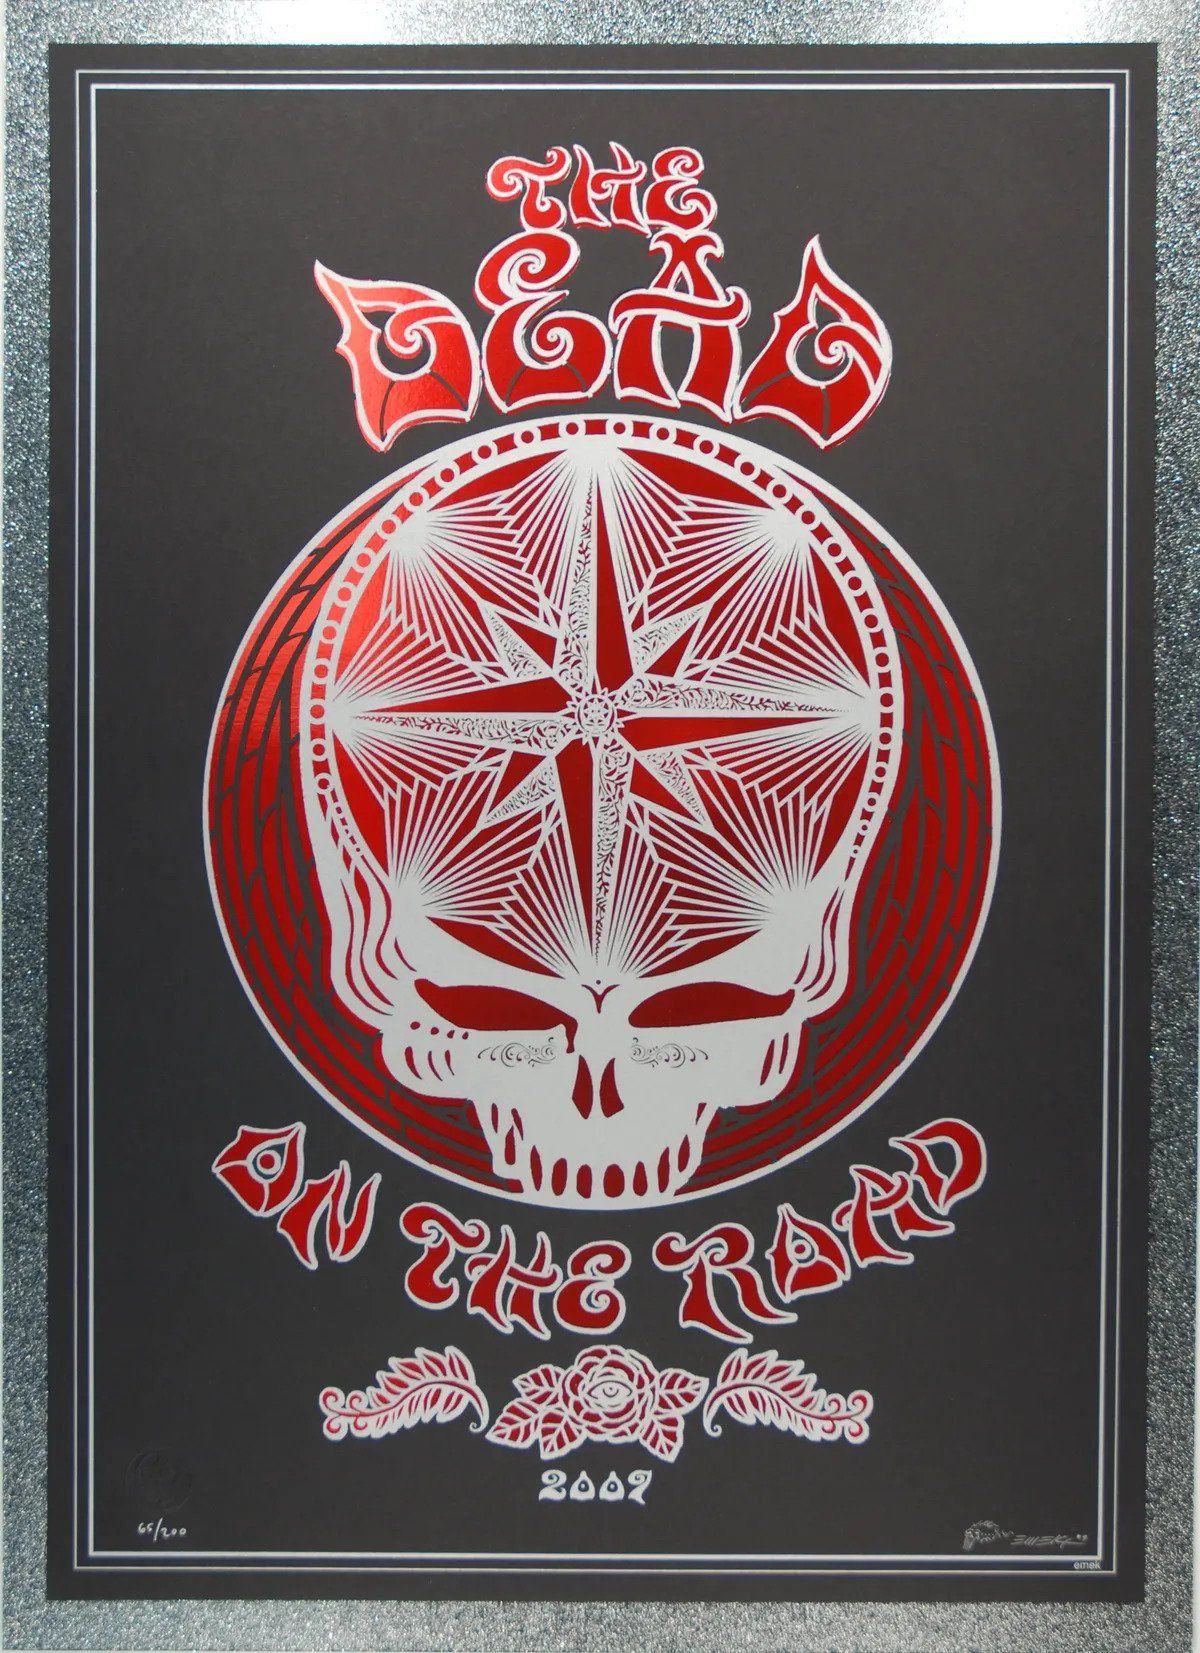 The Dead On The Road Die Cut 2009 Concert Poster